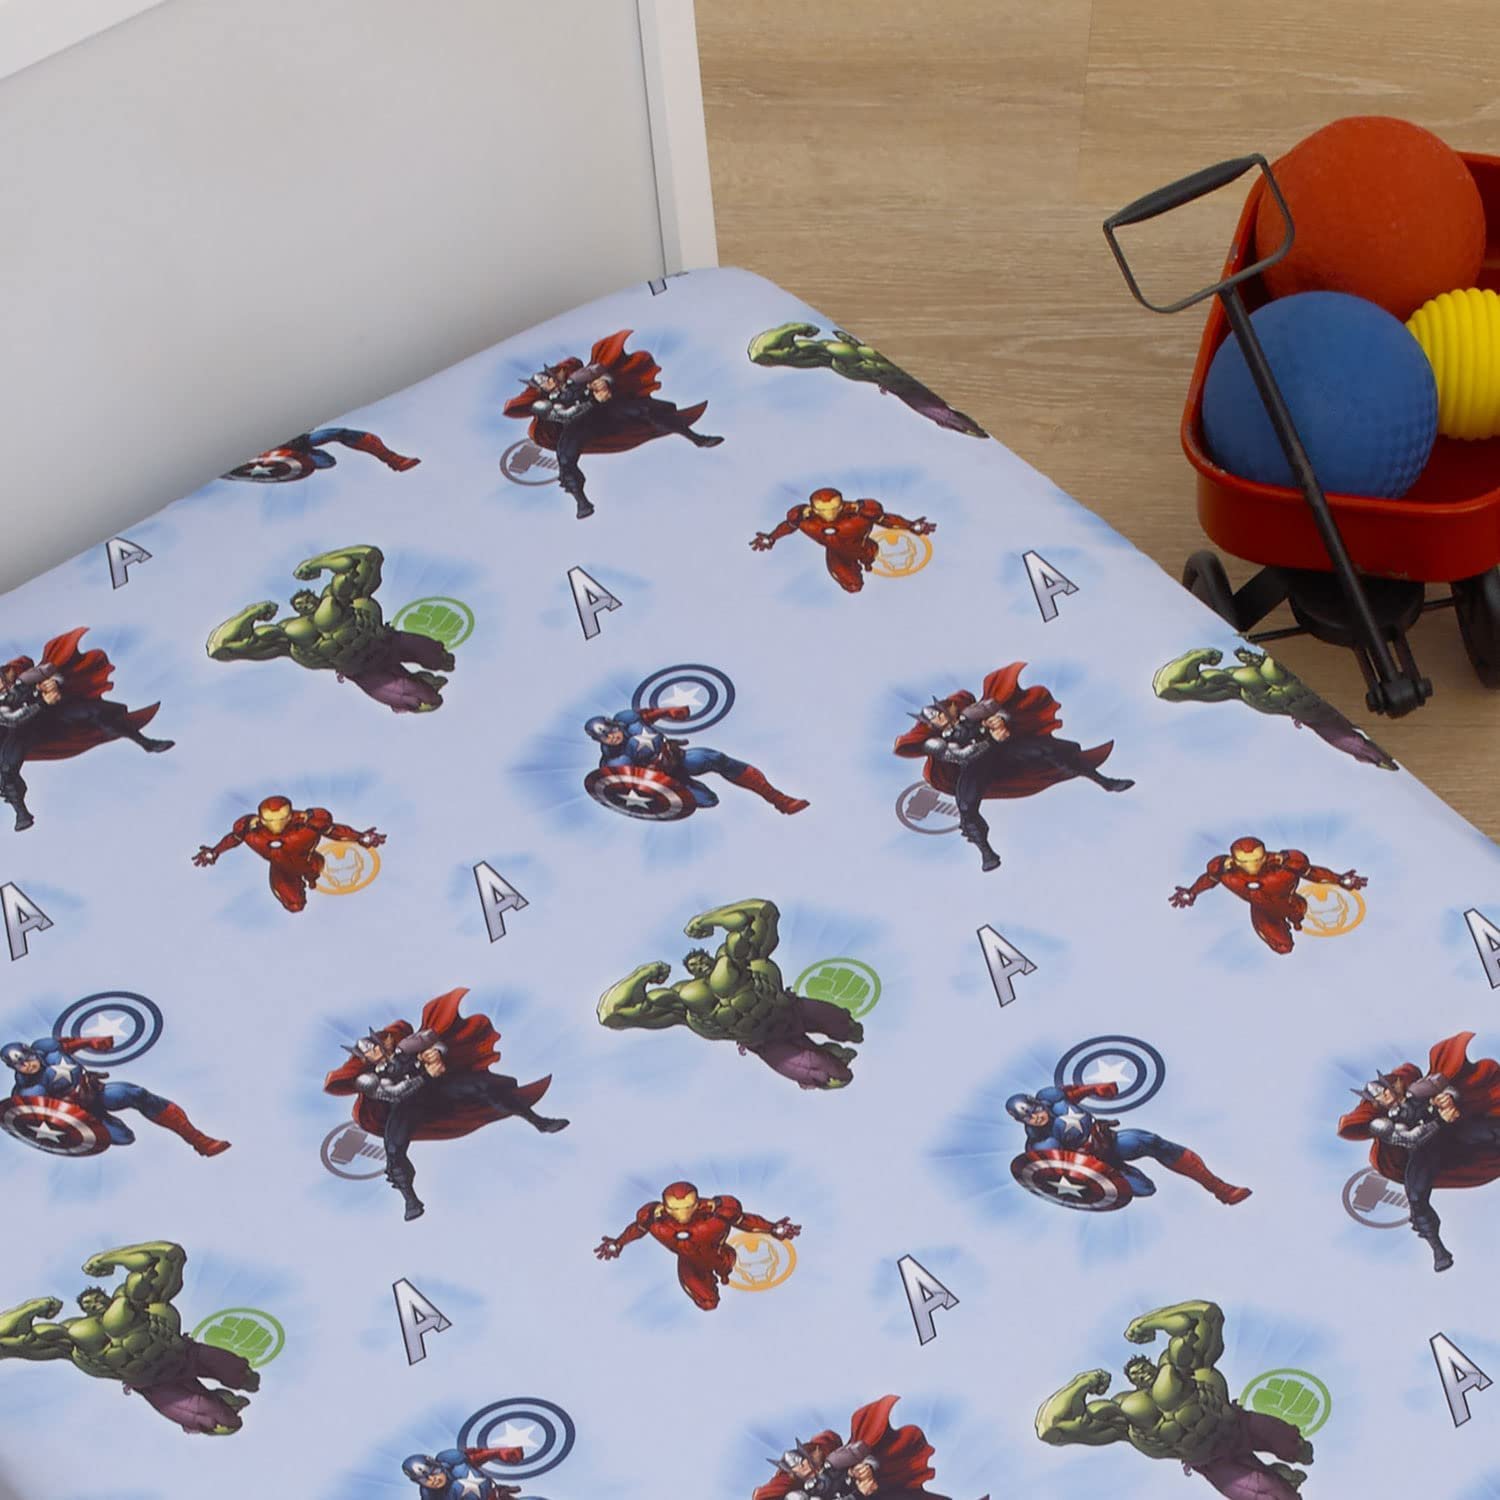 Marvel Avengers Fitted Crib Sheet 100% Soft Microfiber, Baby Sheet, Fits Standard Size Crib Mattress 28in x 52in - image 3 of 4